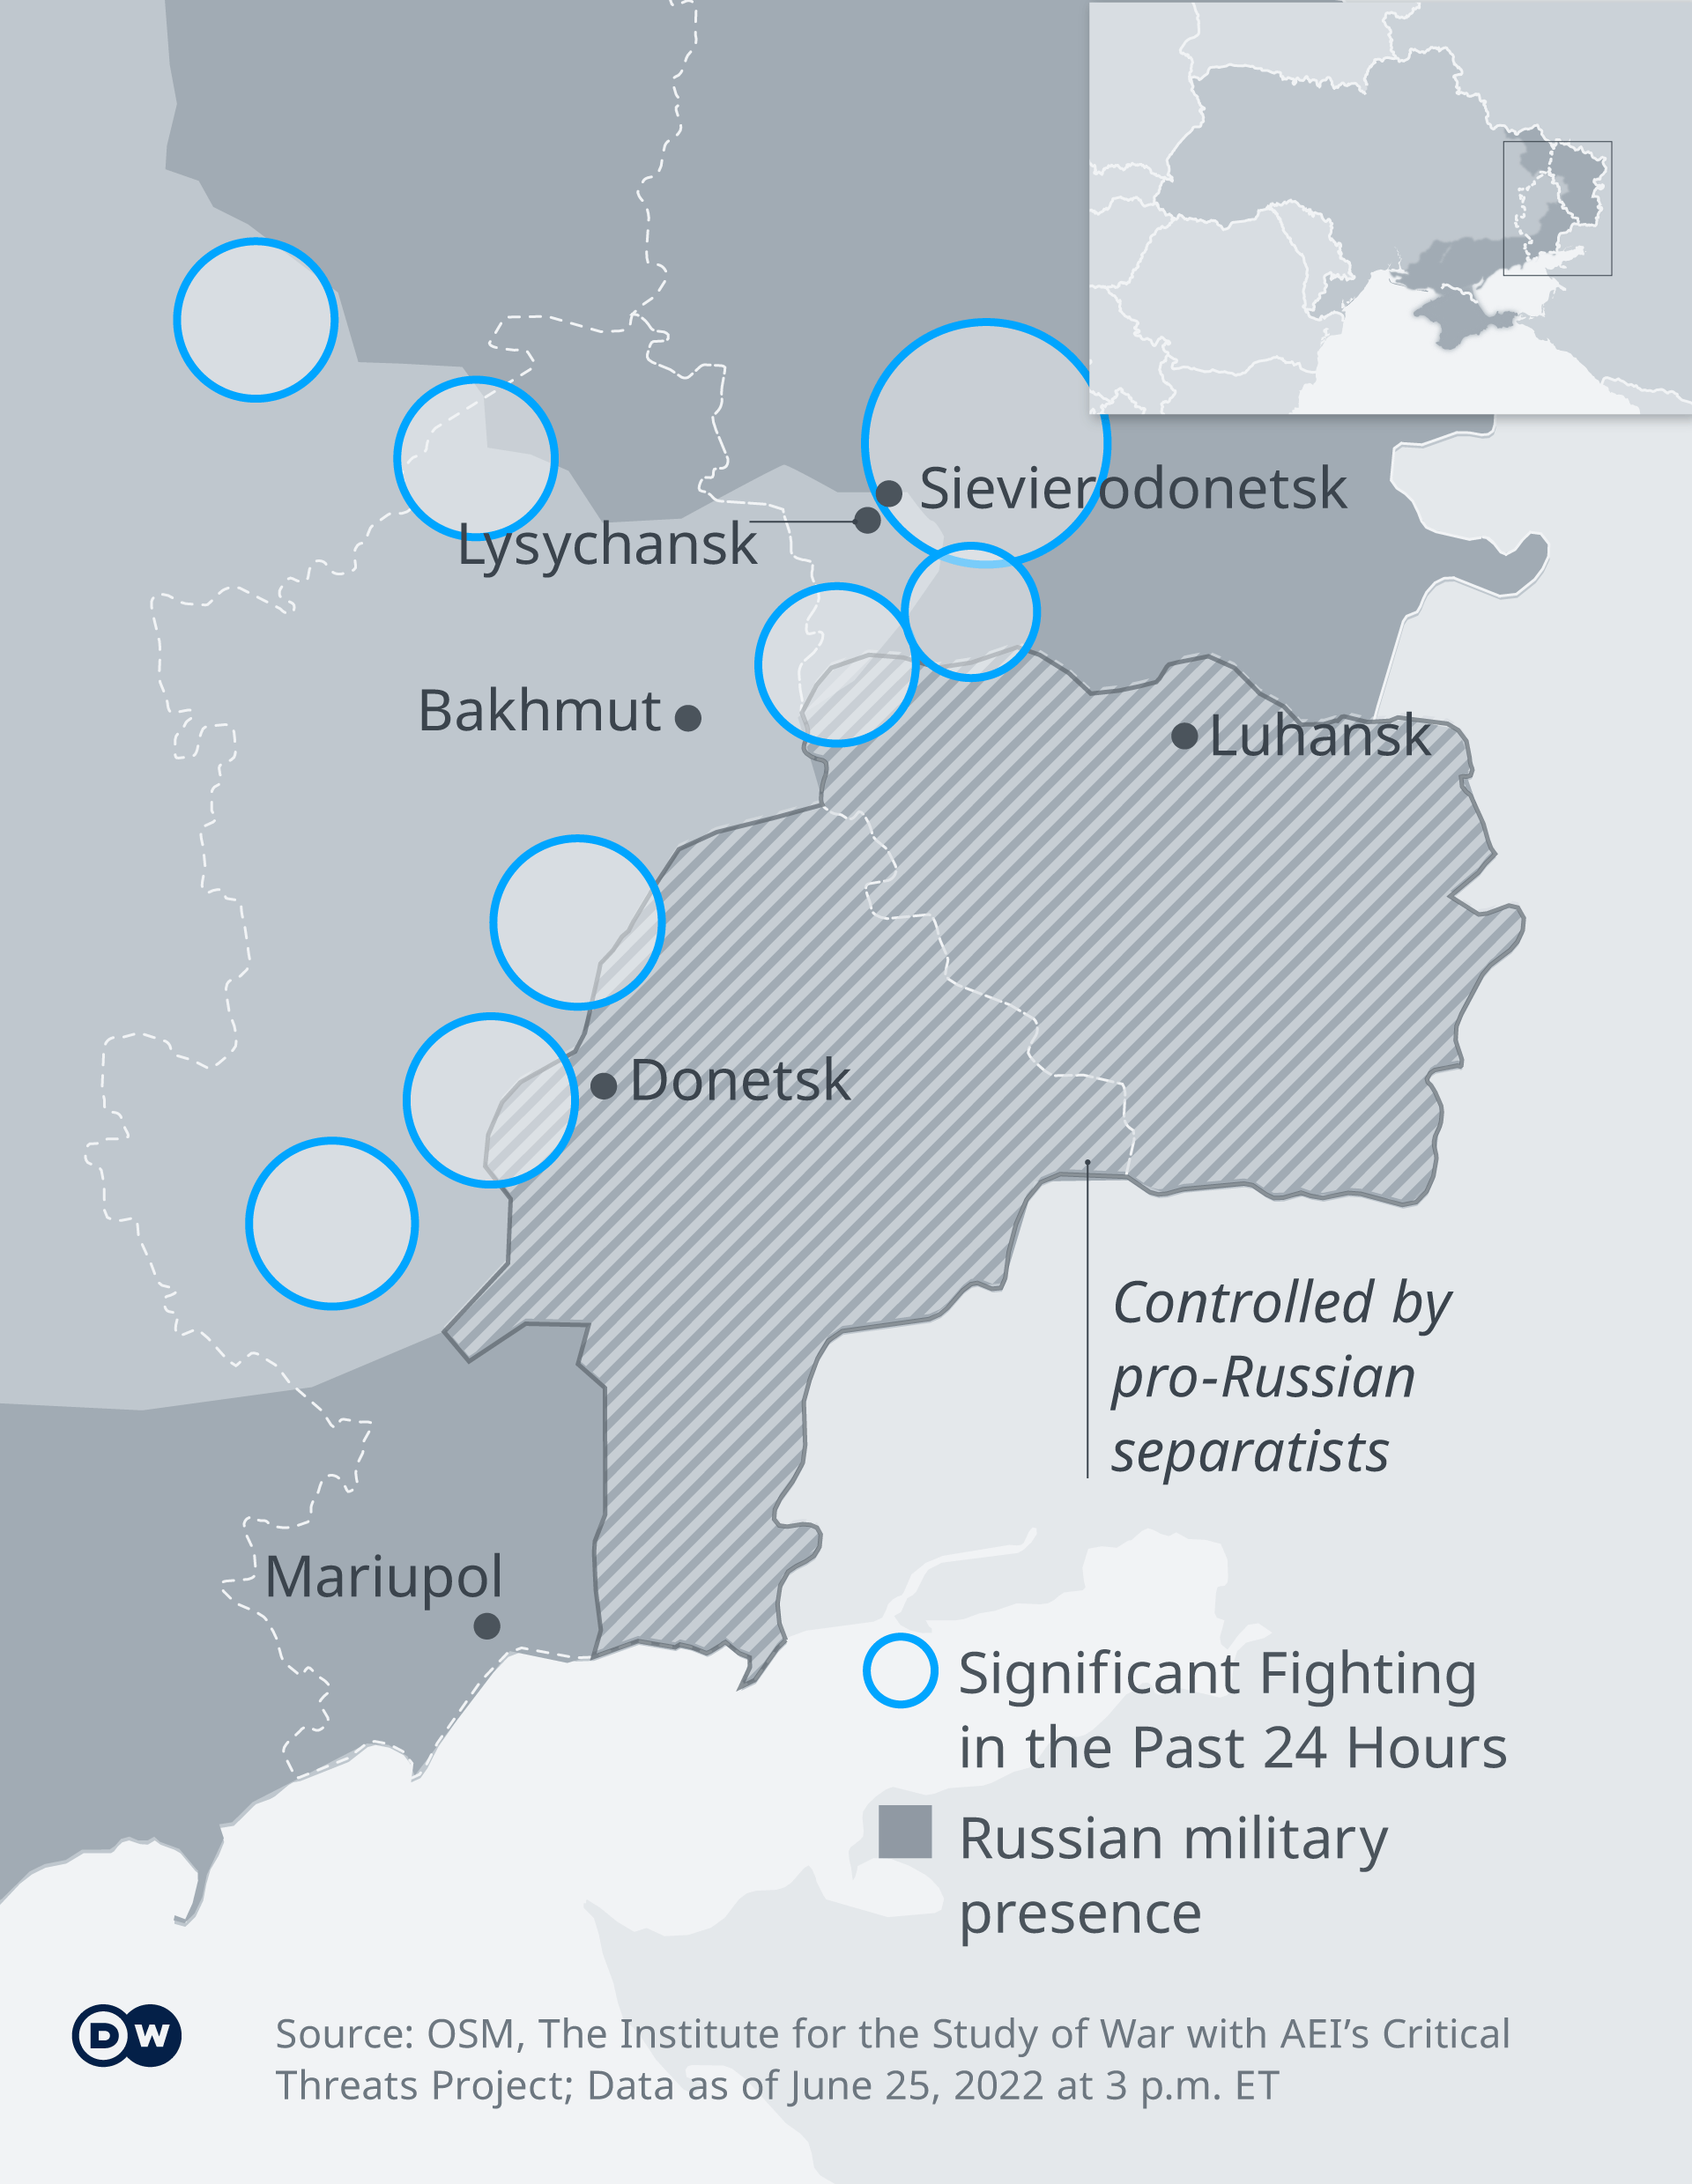 A map showing where fighting has been has been raging the most in eastern Ukraine, and where there is Russian military presence